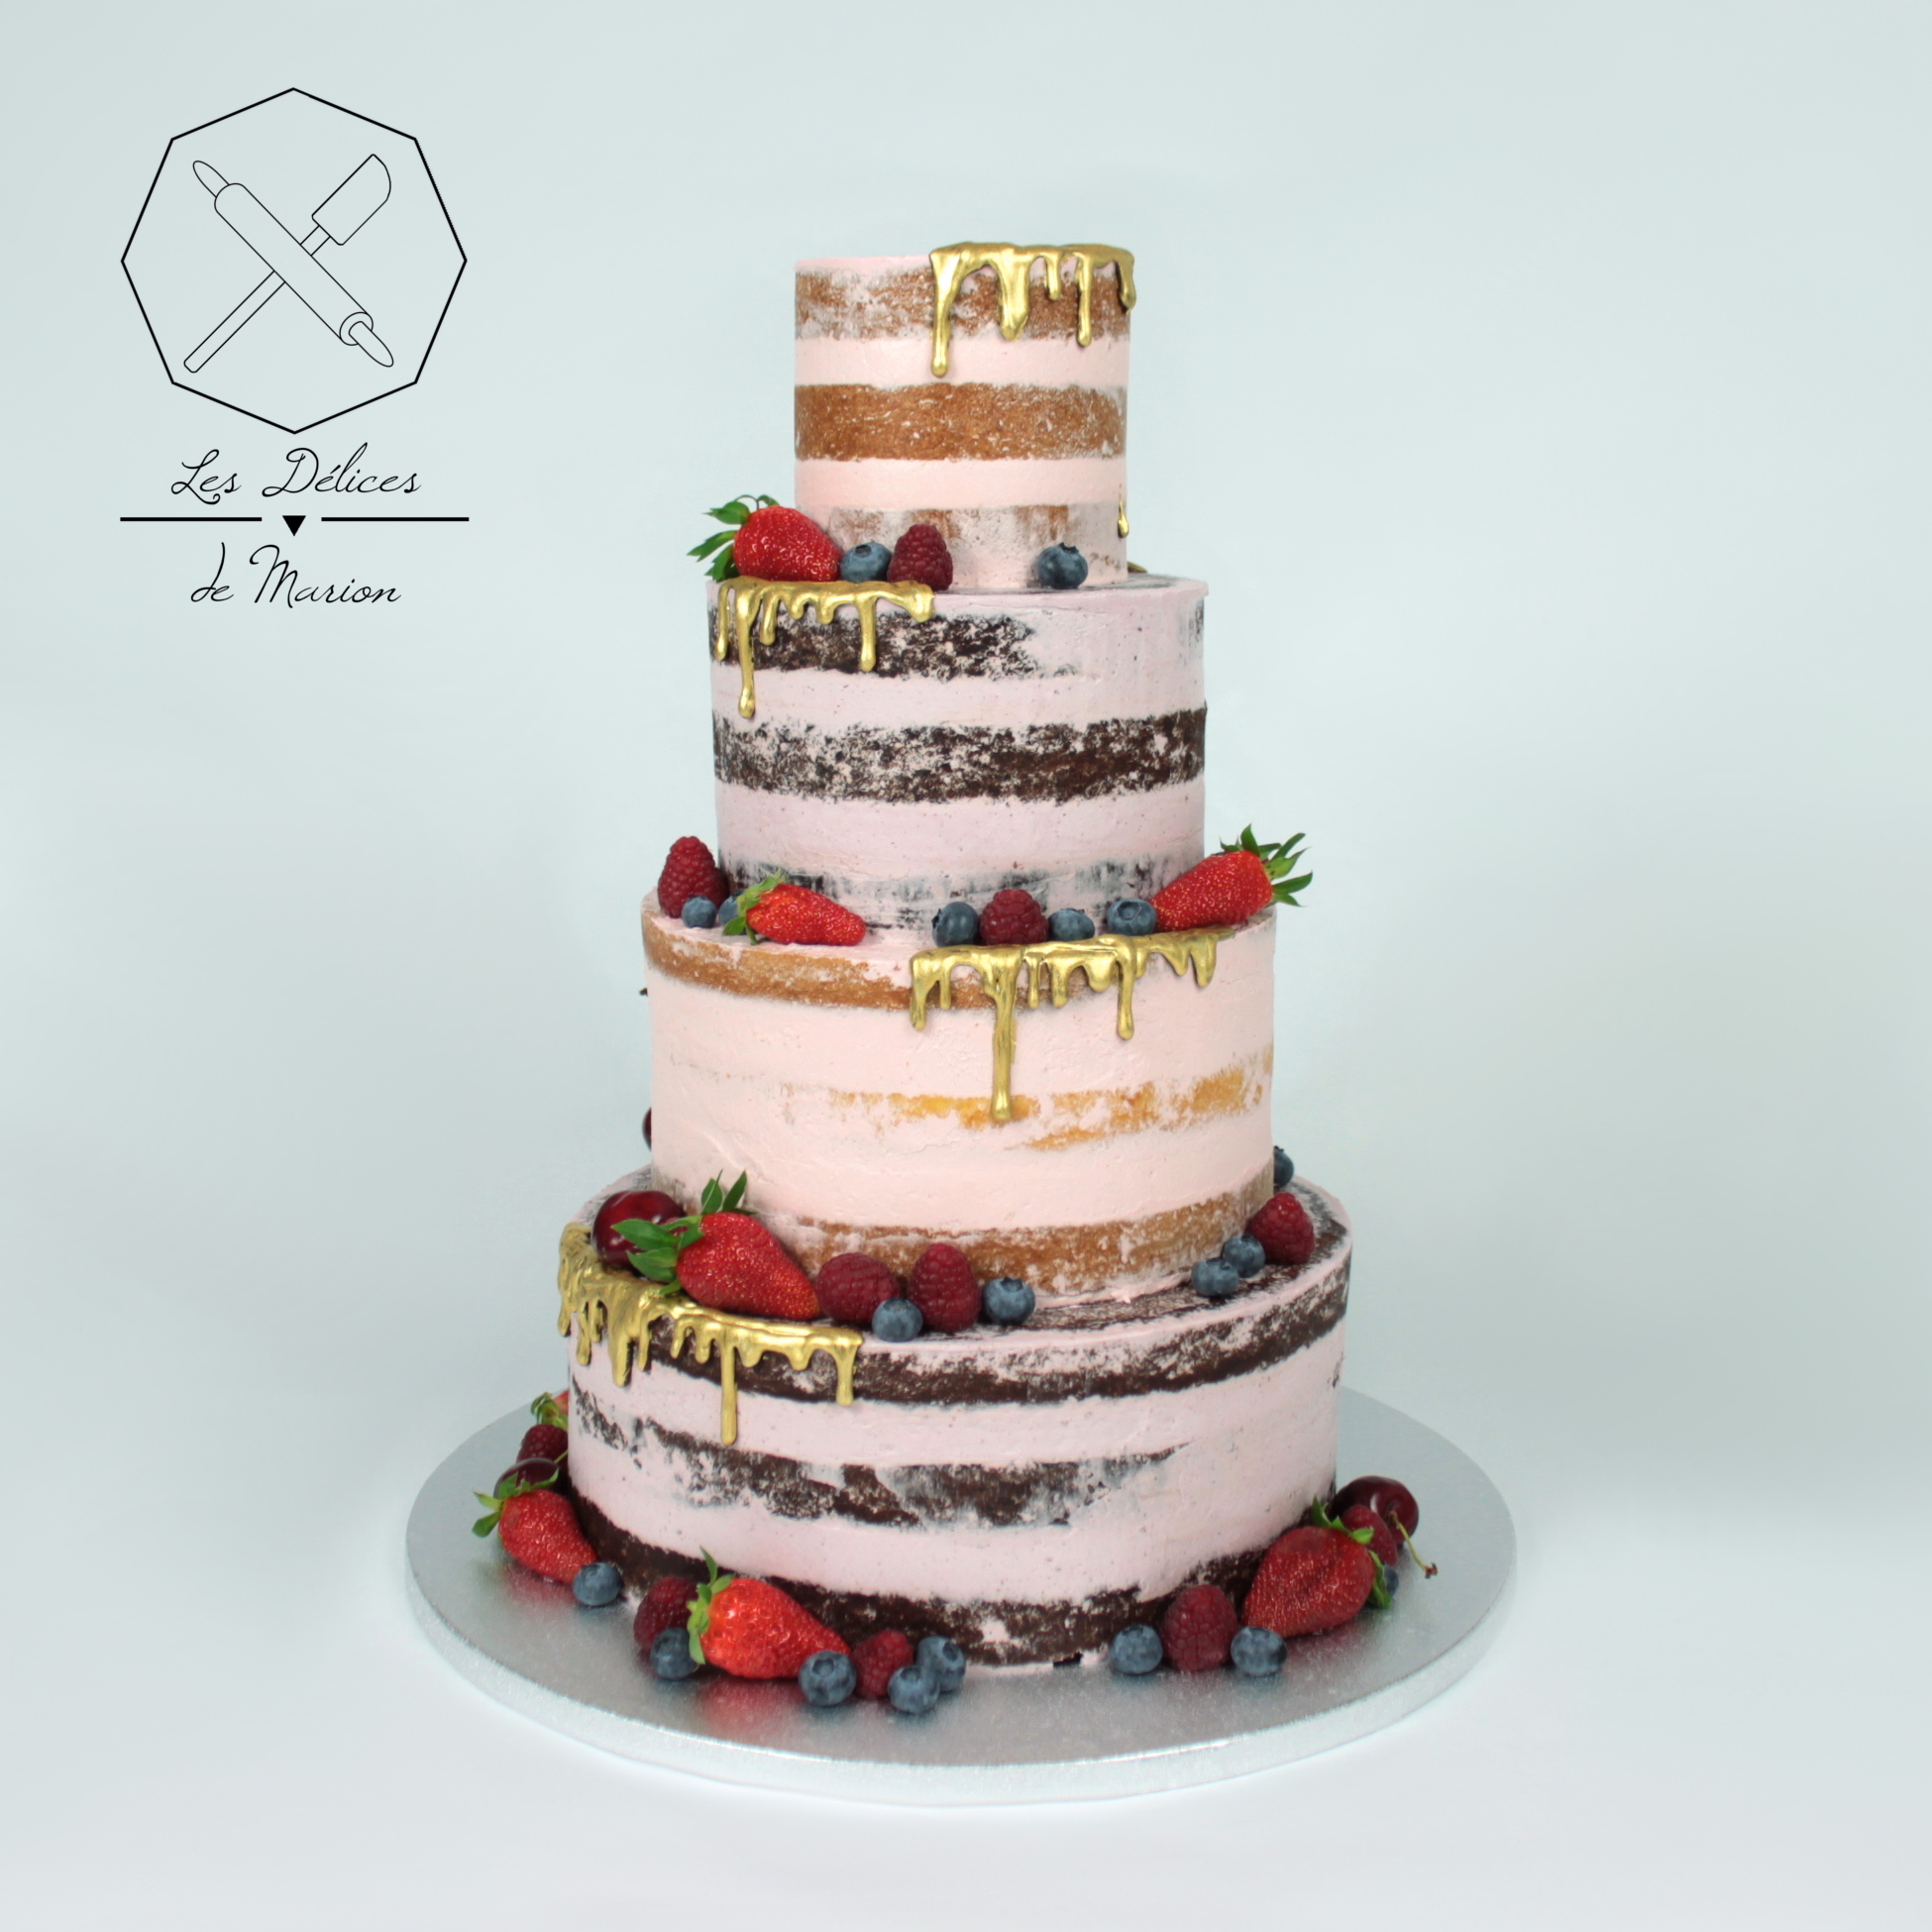 wedding_cake_gateau_mariage_semi-naked_fruits_drip_or_caake-design_delices-marion